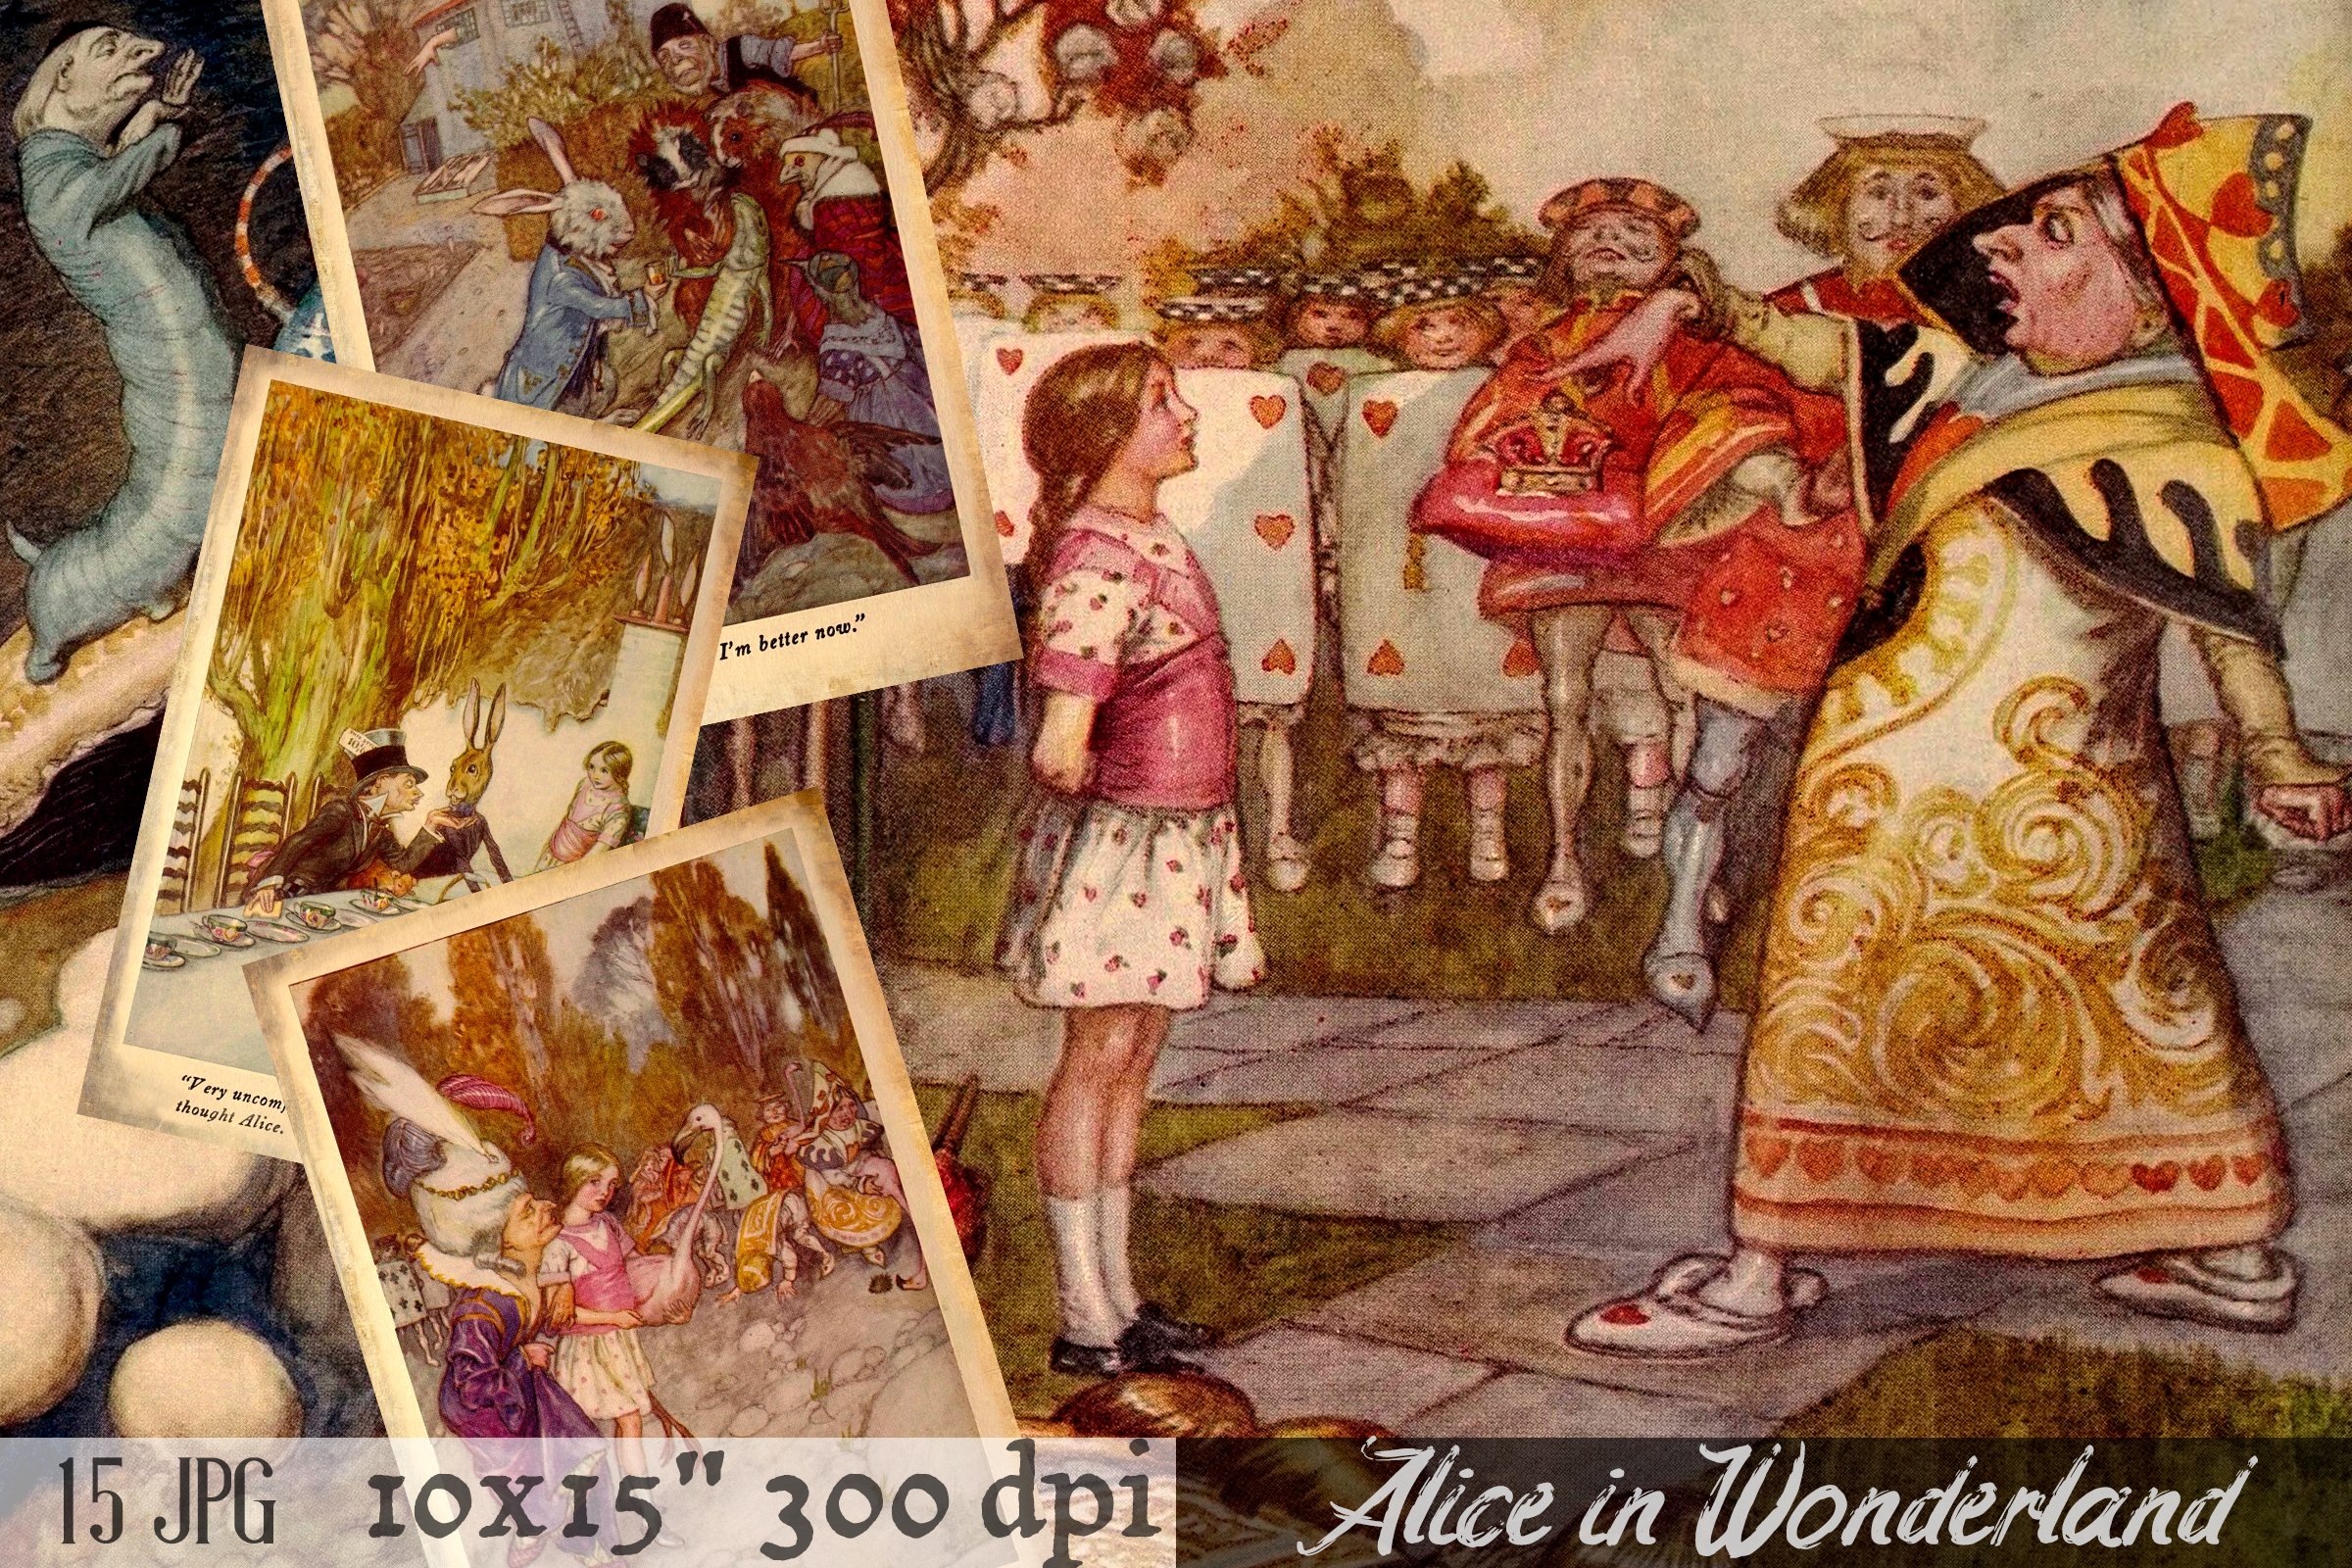 Images of Alice and other characters from the tale of Alice.